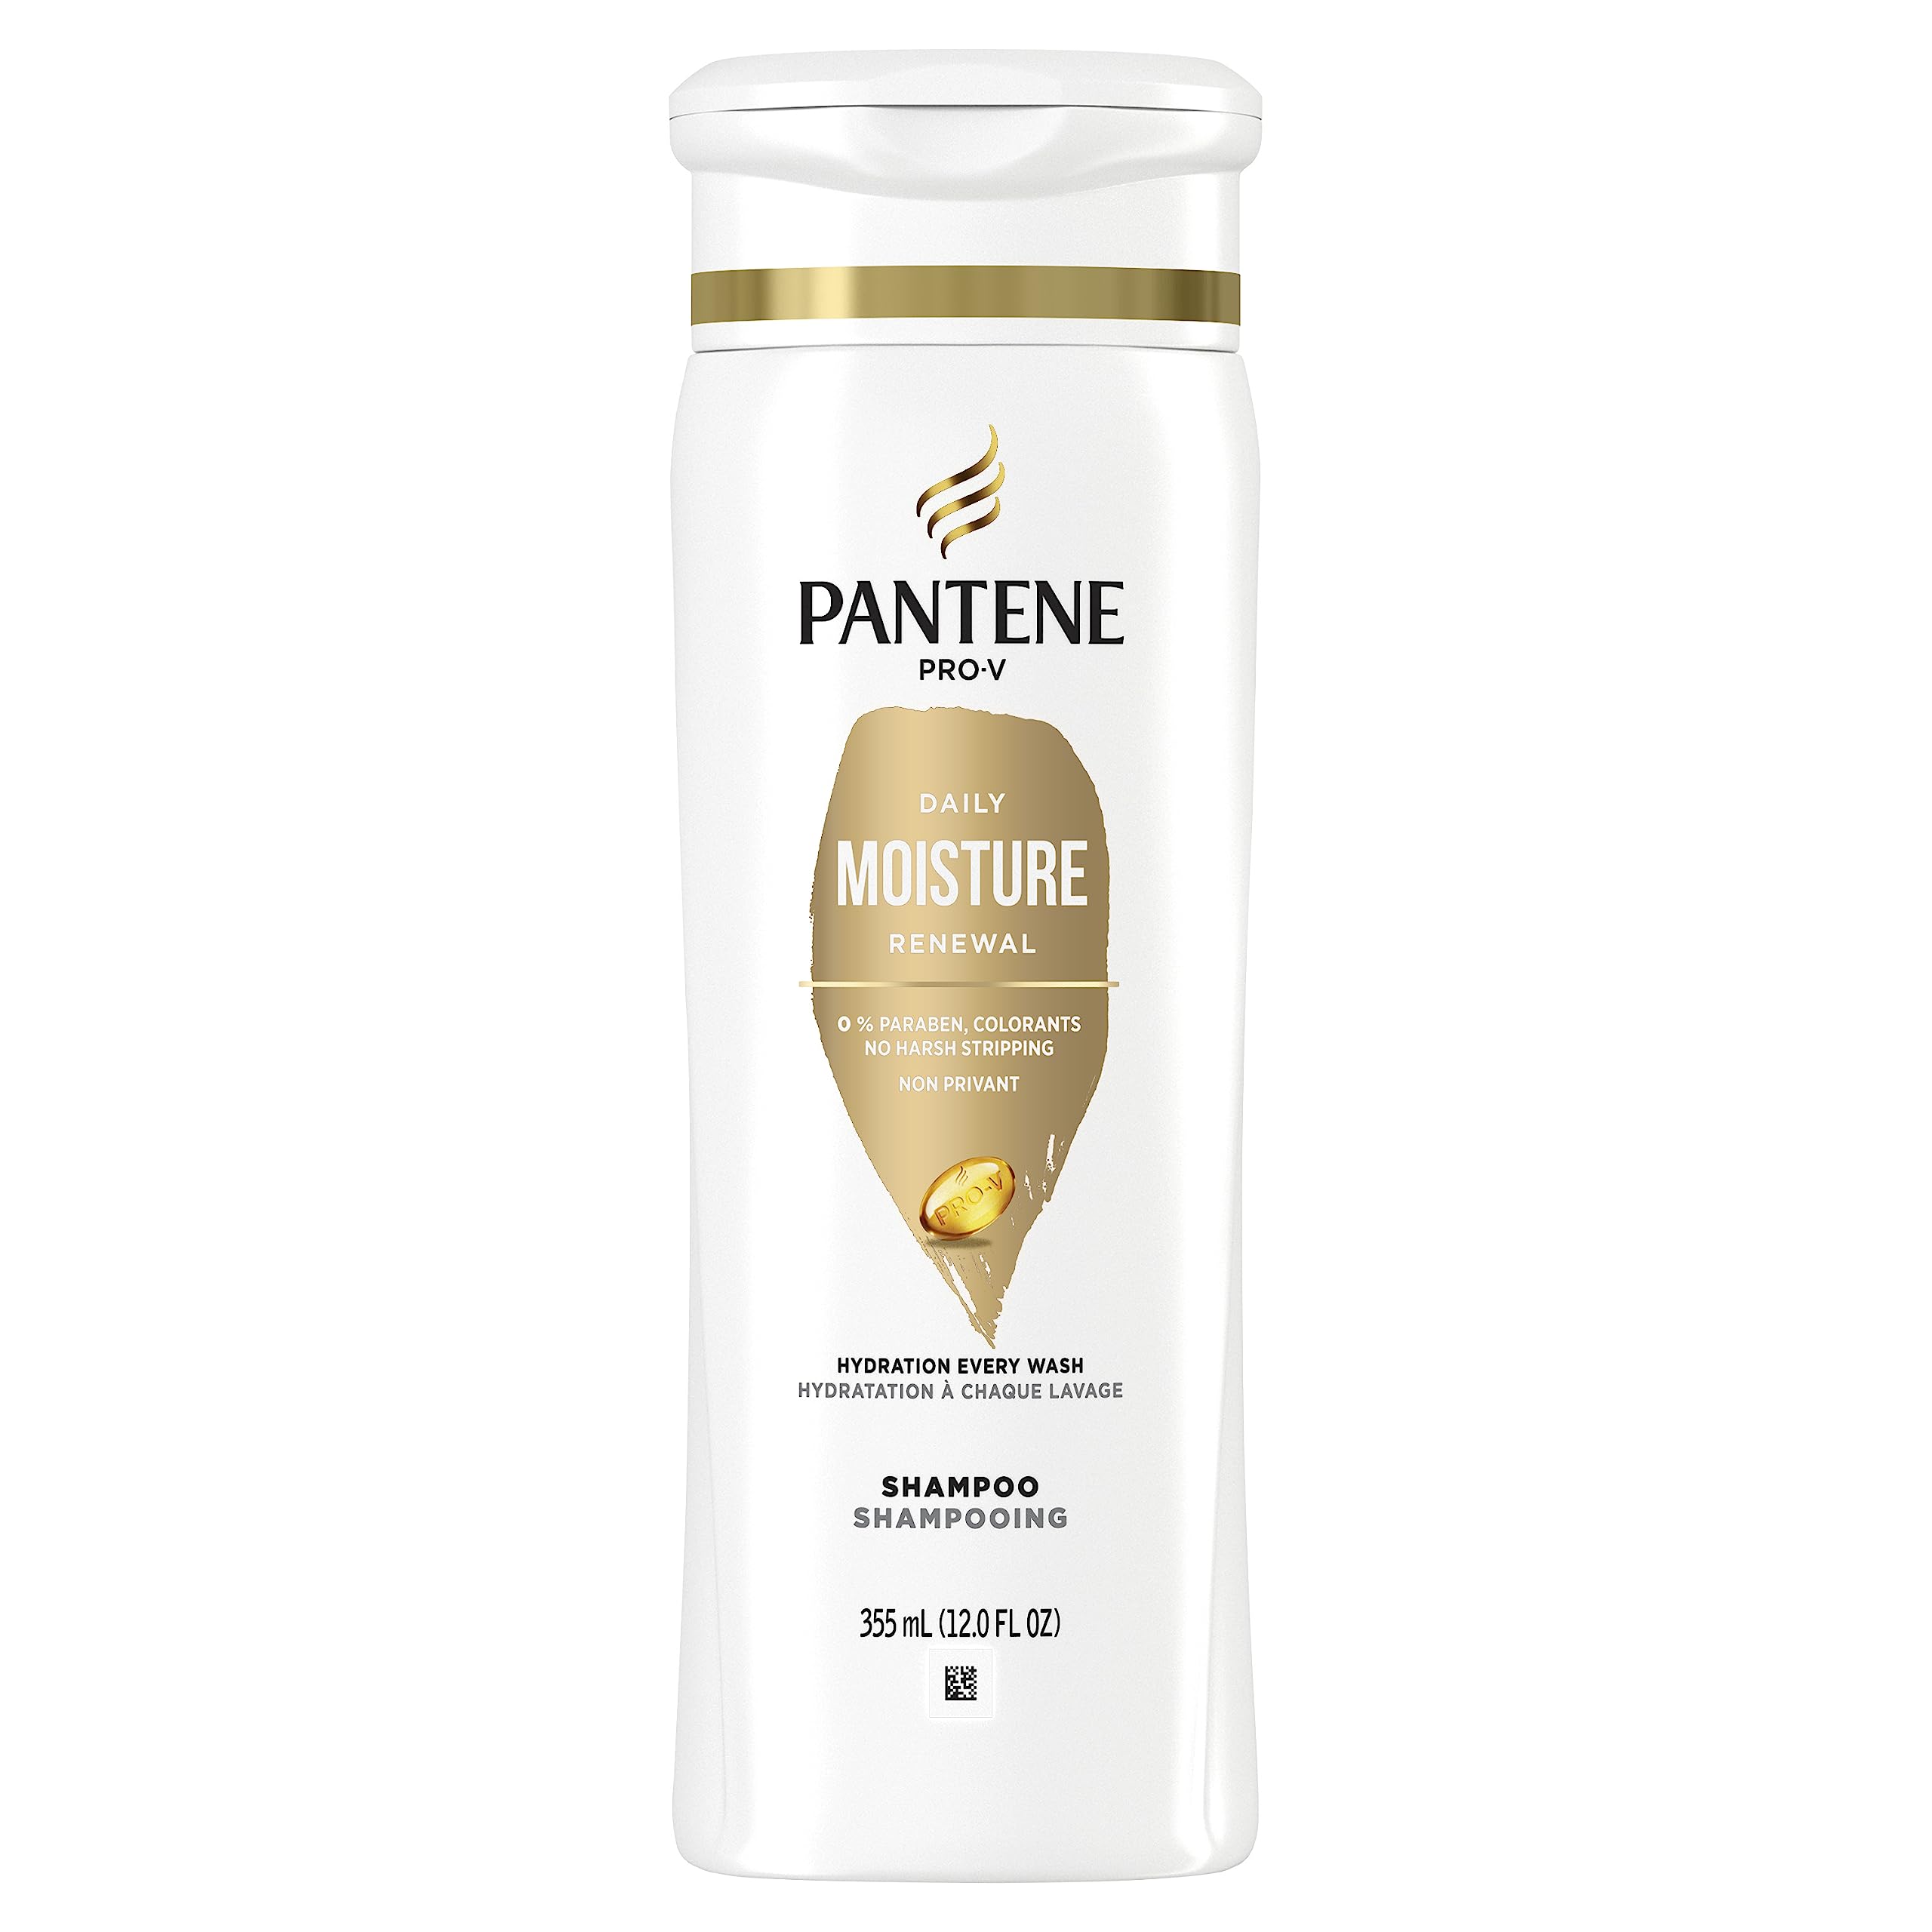 Pantene Shampoo for Dry Hair, Daily Moisture Renewal, Safe for Color-Treated Hair, 355 mL